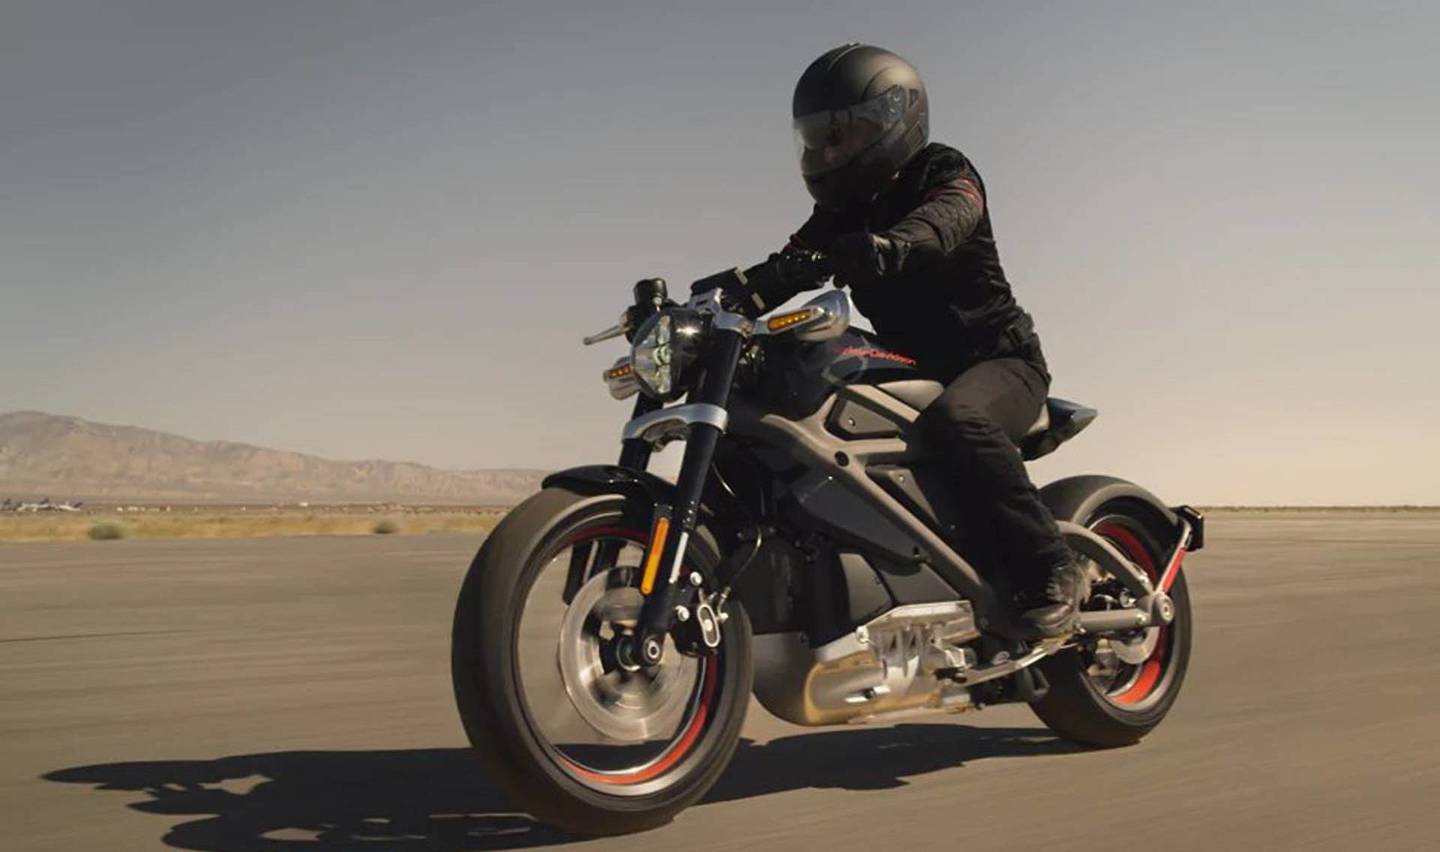 Harley-Davidson to launch electric motorcycle within 18 months